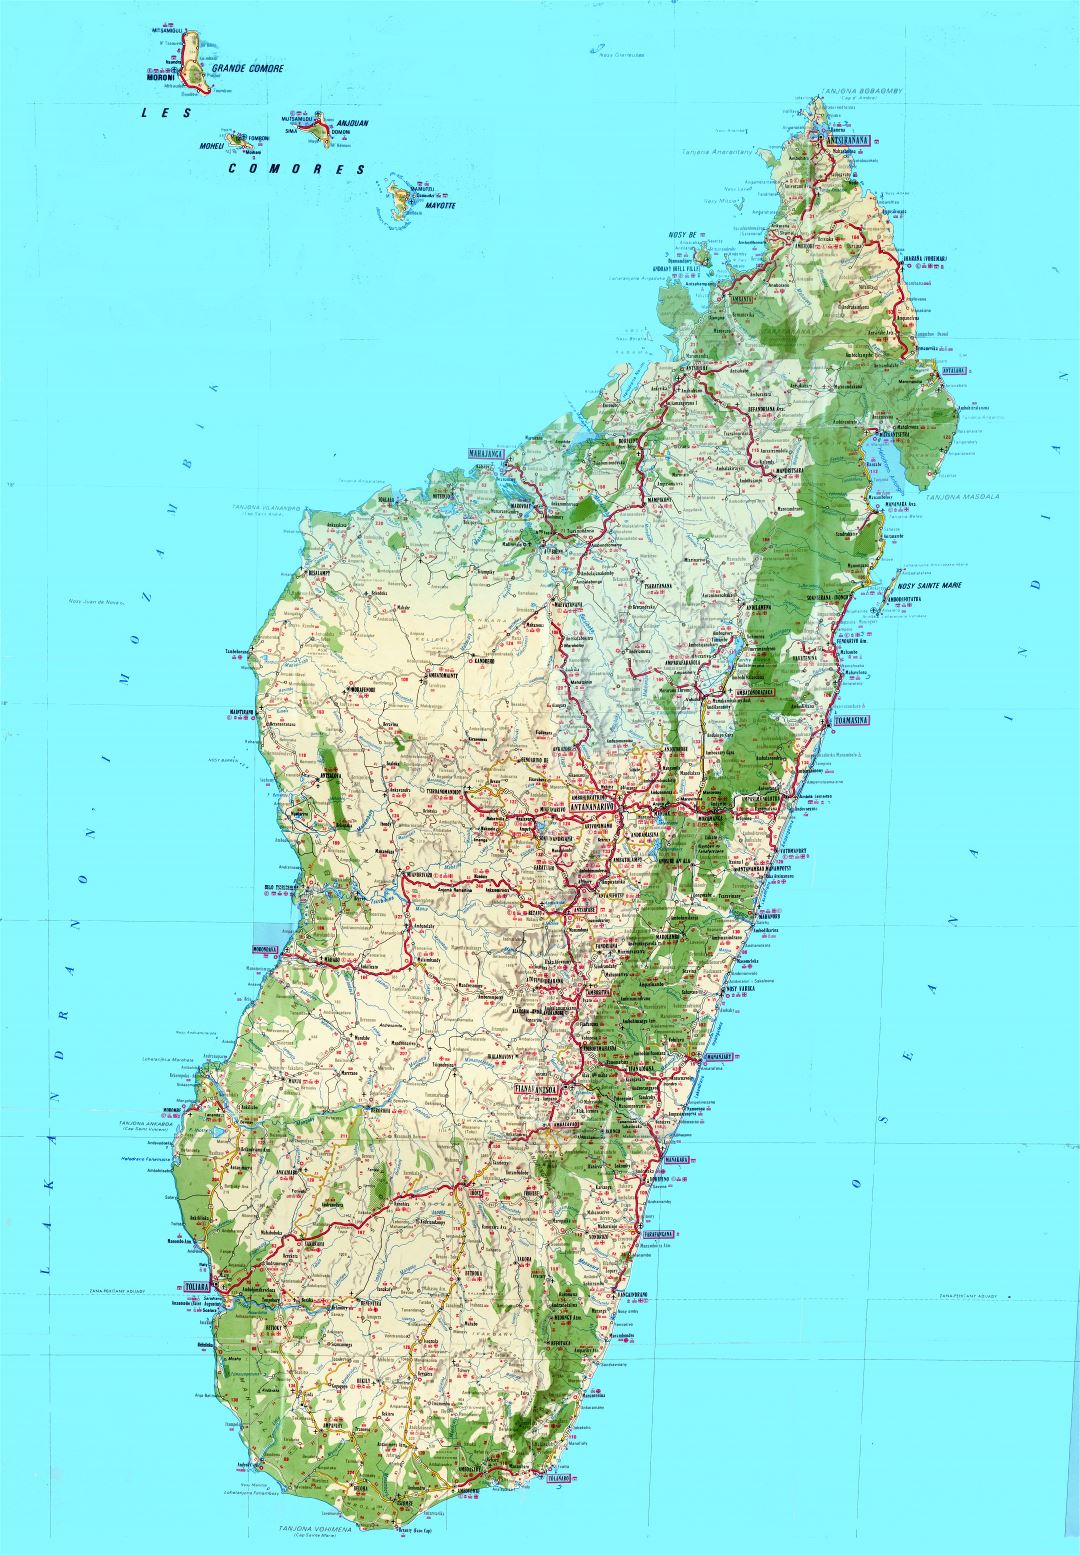 Large scale detailed topographic and tourist map of Madagascar with all roads, cities, villages, airports and other marks